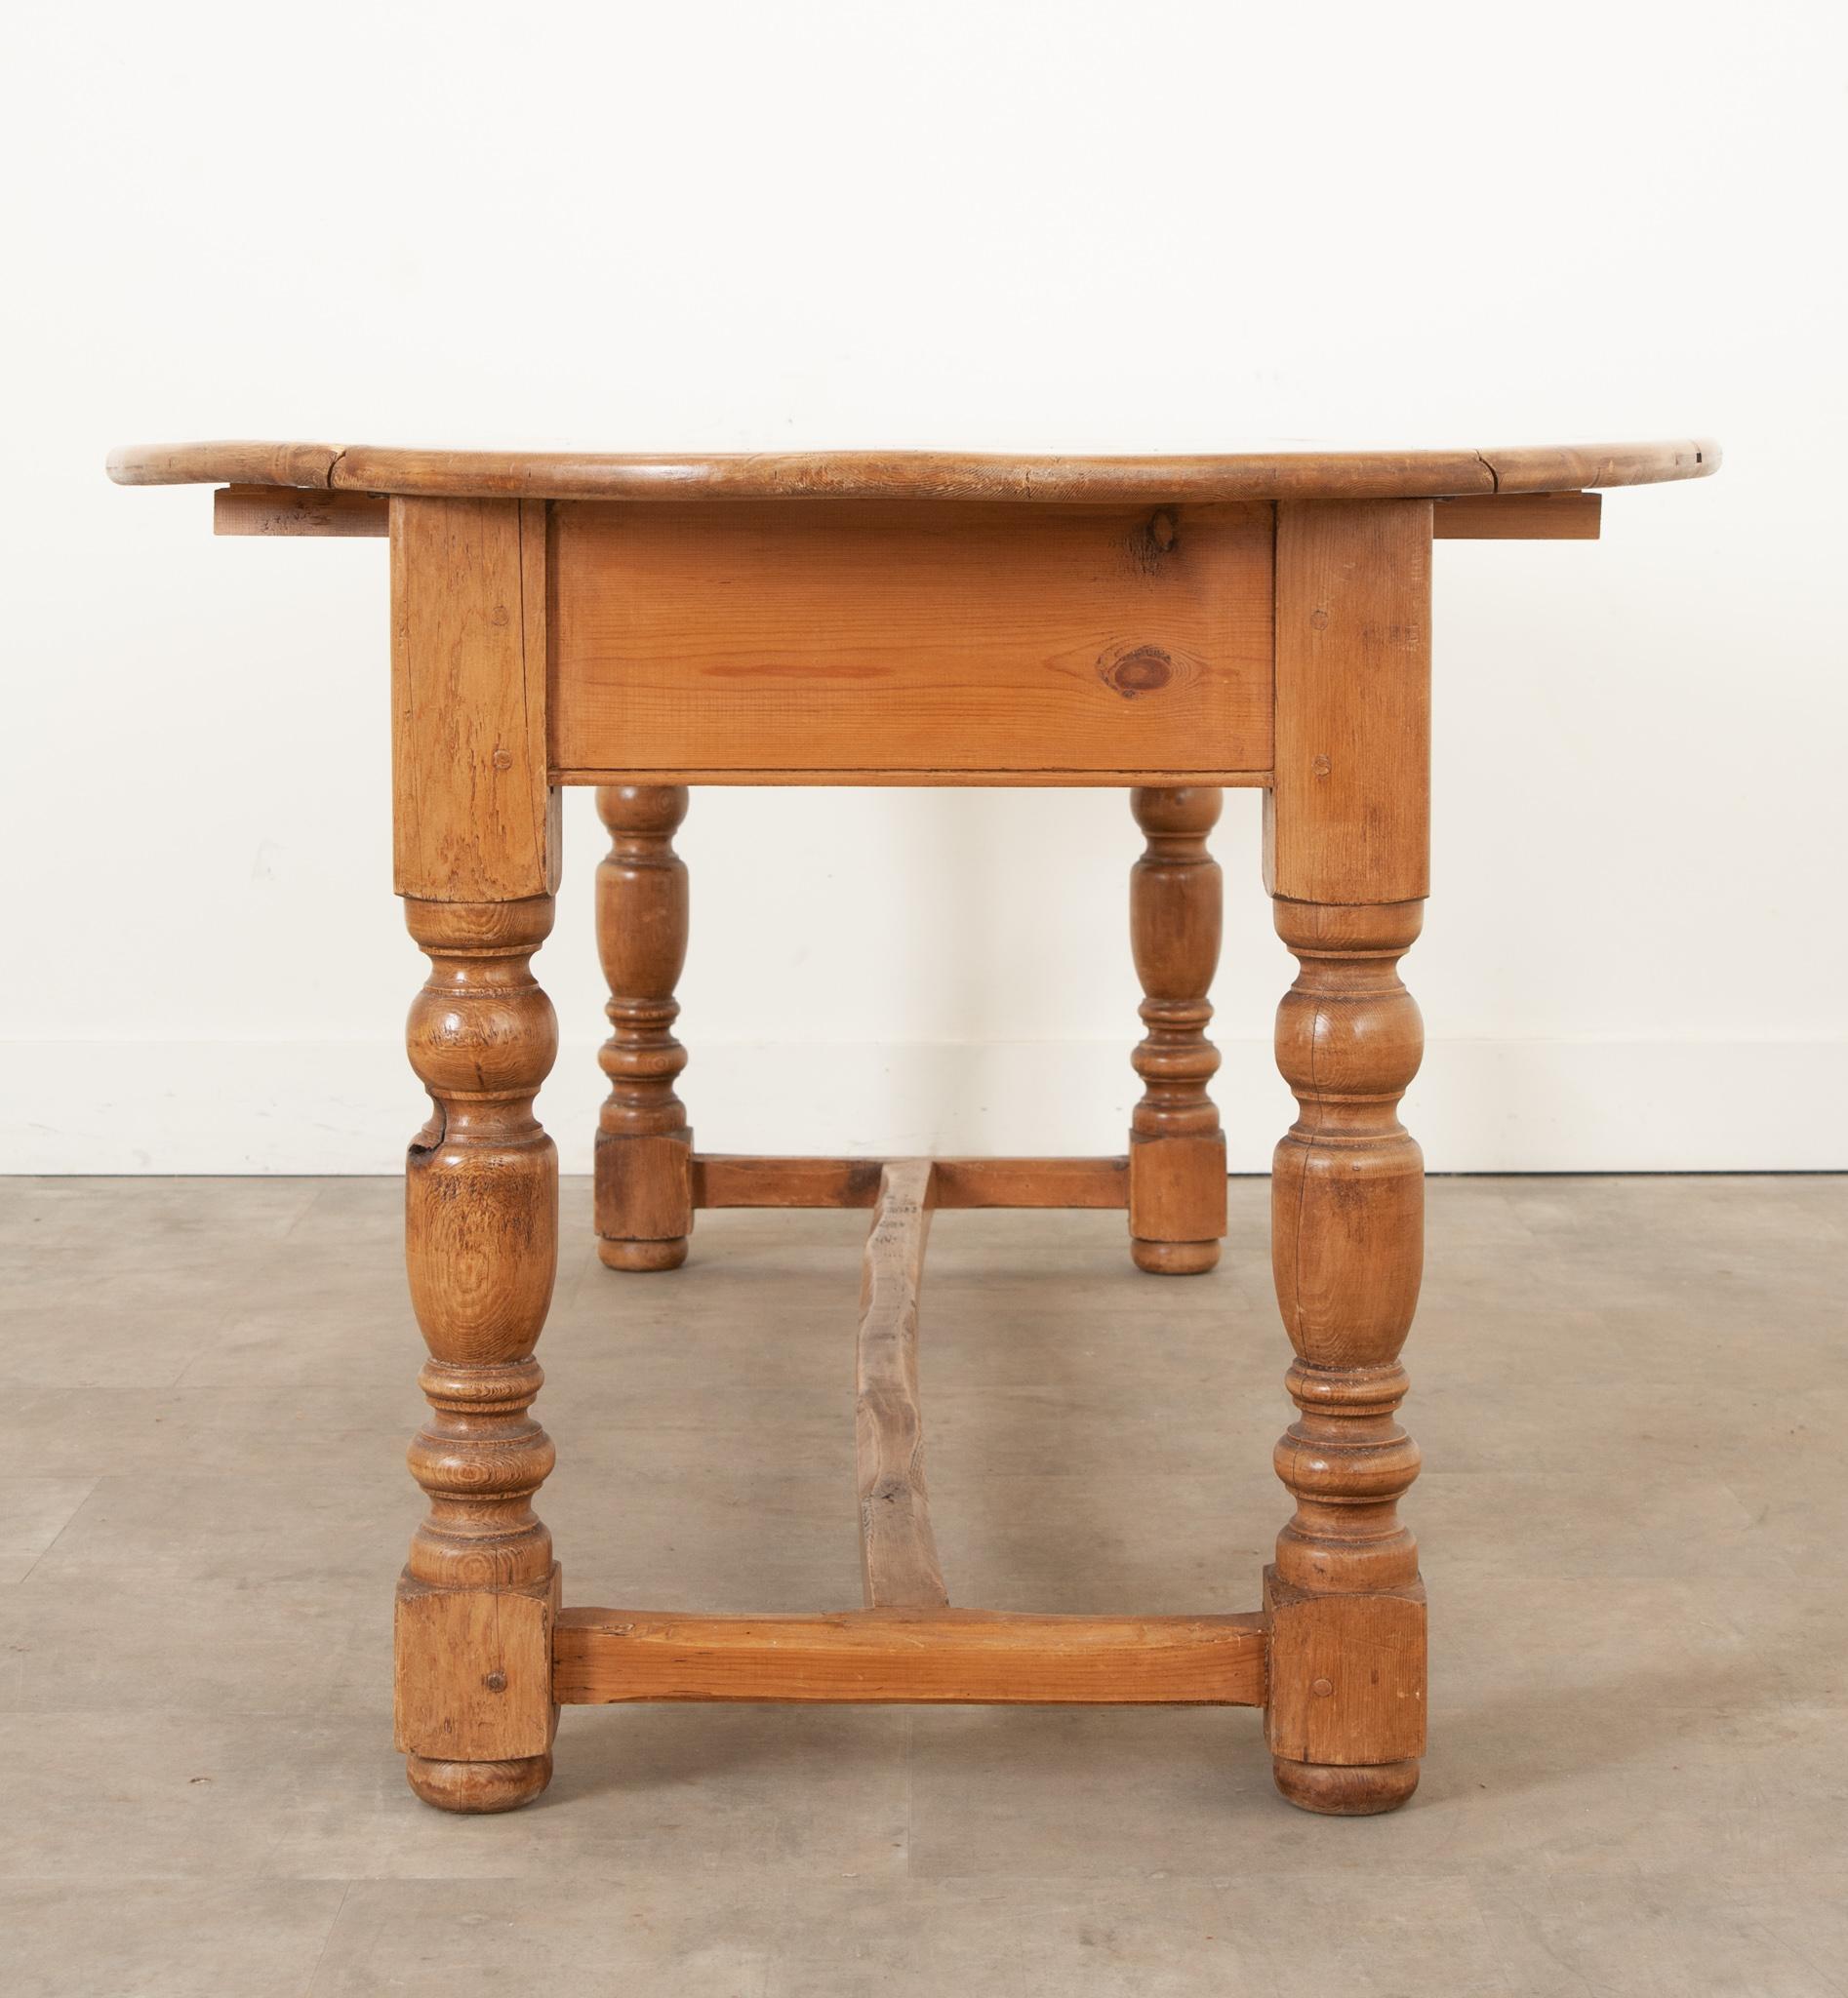 An English drop leaf dining table made of solid pine. This dining table can be used as a console or a dining table. Four turned pine baluster legs are connected with a sturdy stretcher which adds character to this classic dining table. The drop